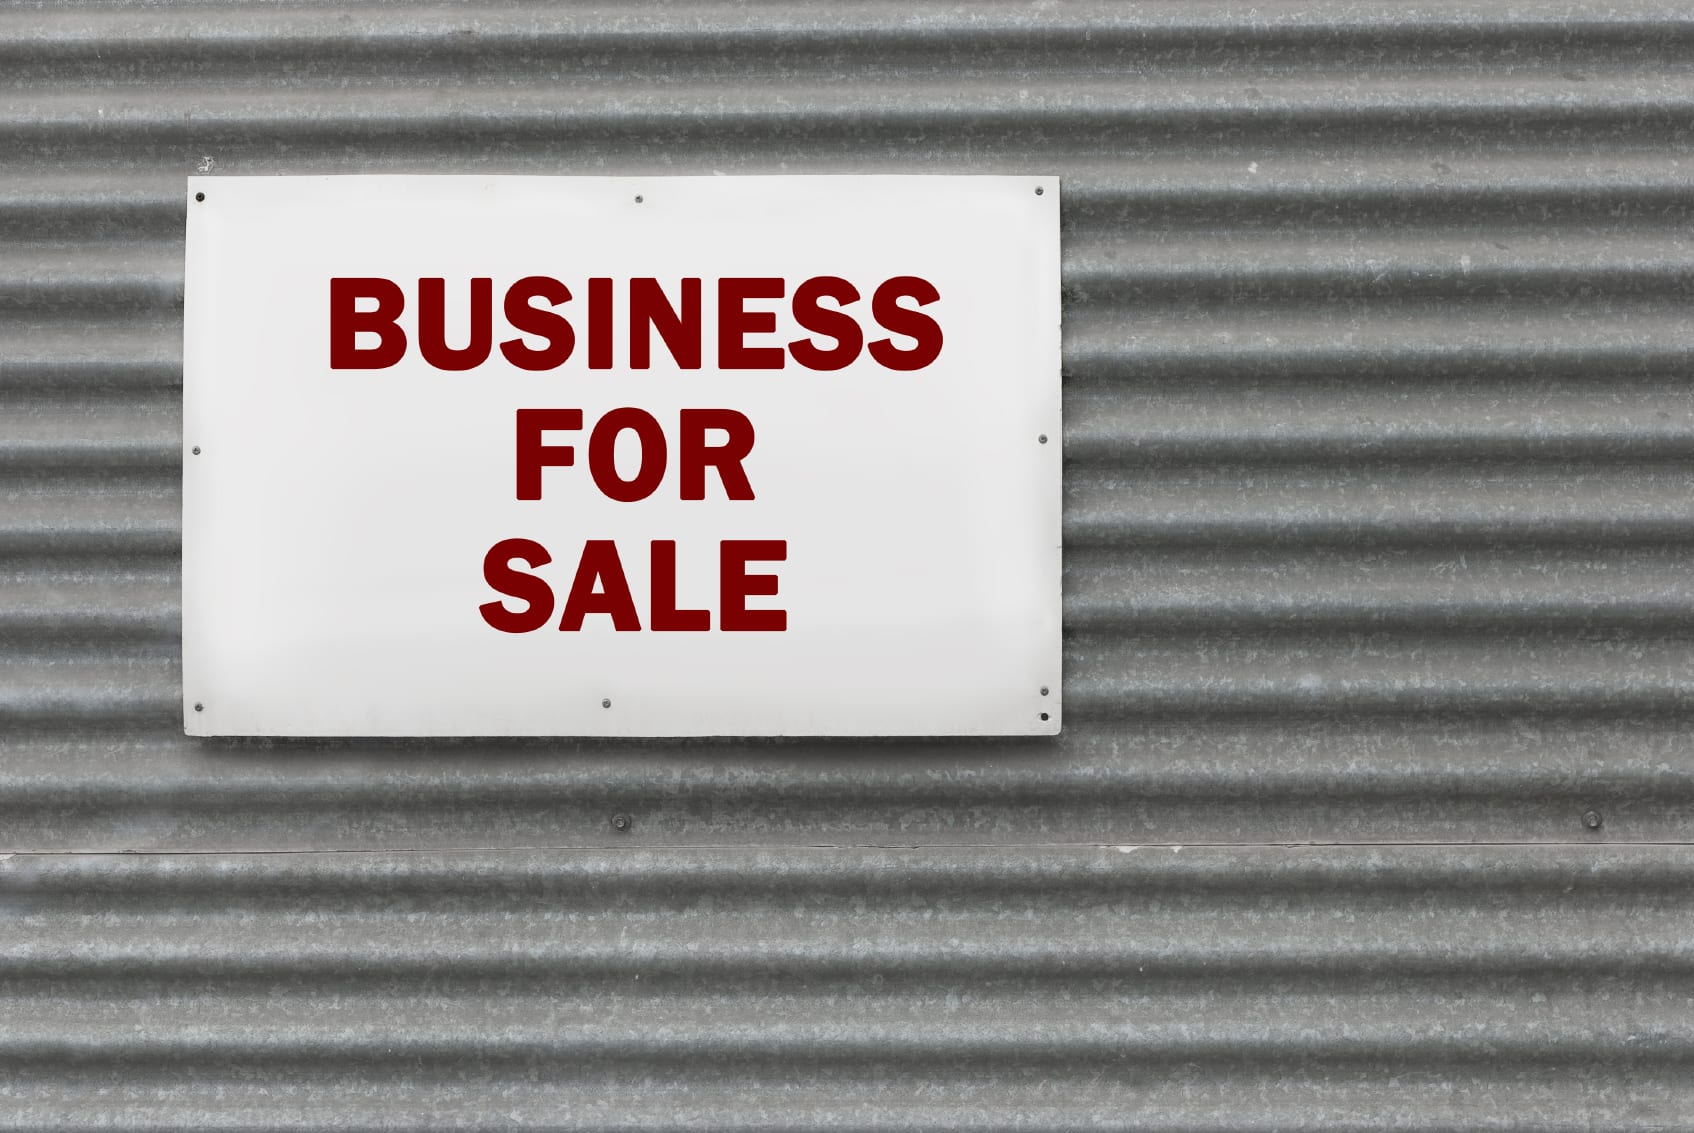 5 Things To Consider When It’s Time To Sell Your Business